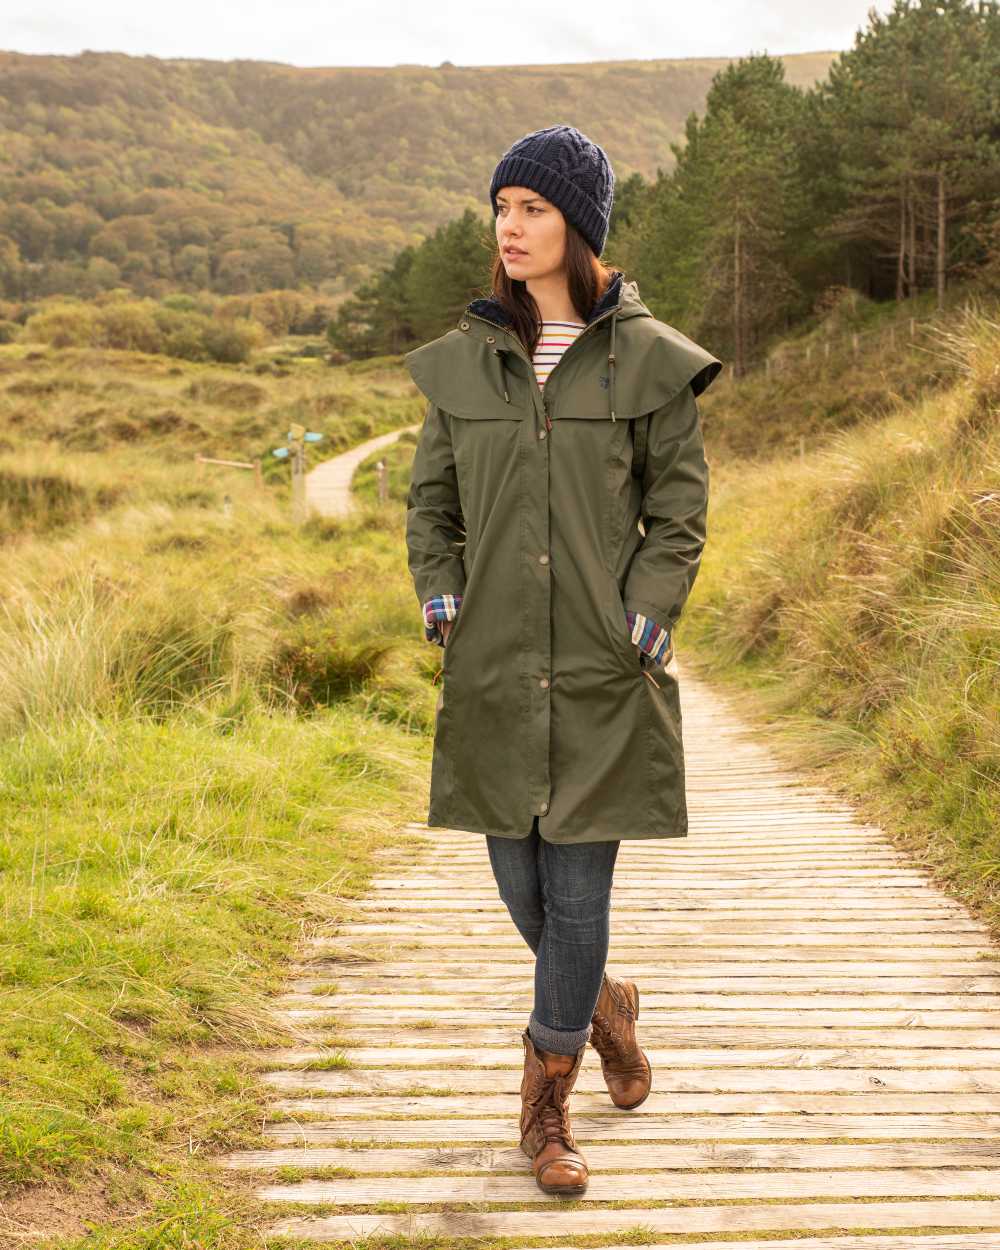 Lighthouse Outrider 3/4 Length Ladies Waterproof Raincoat in Fern 